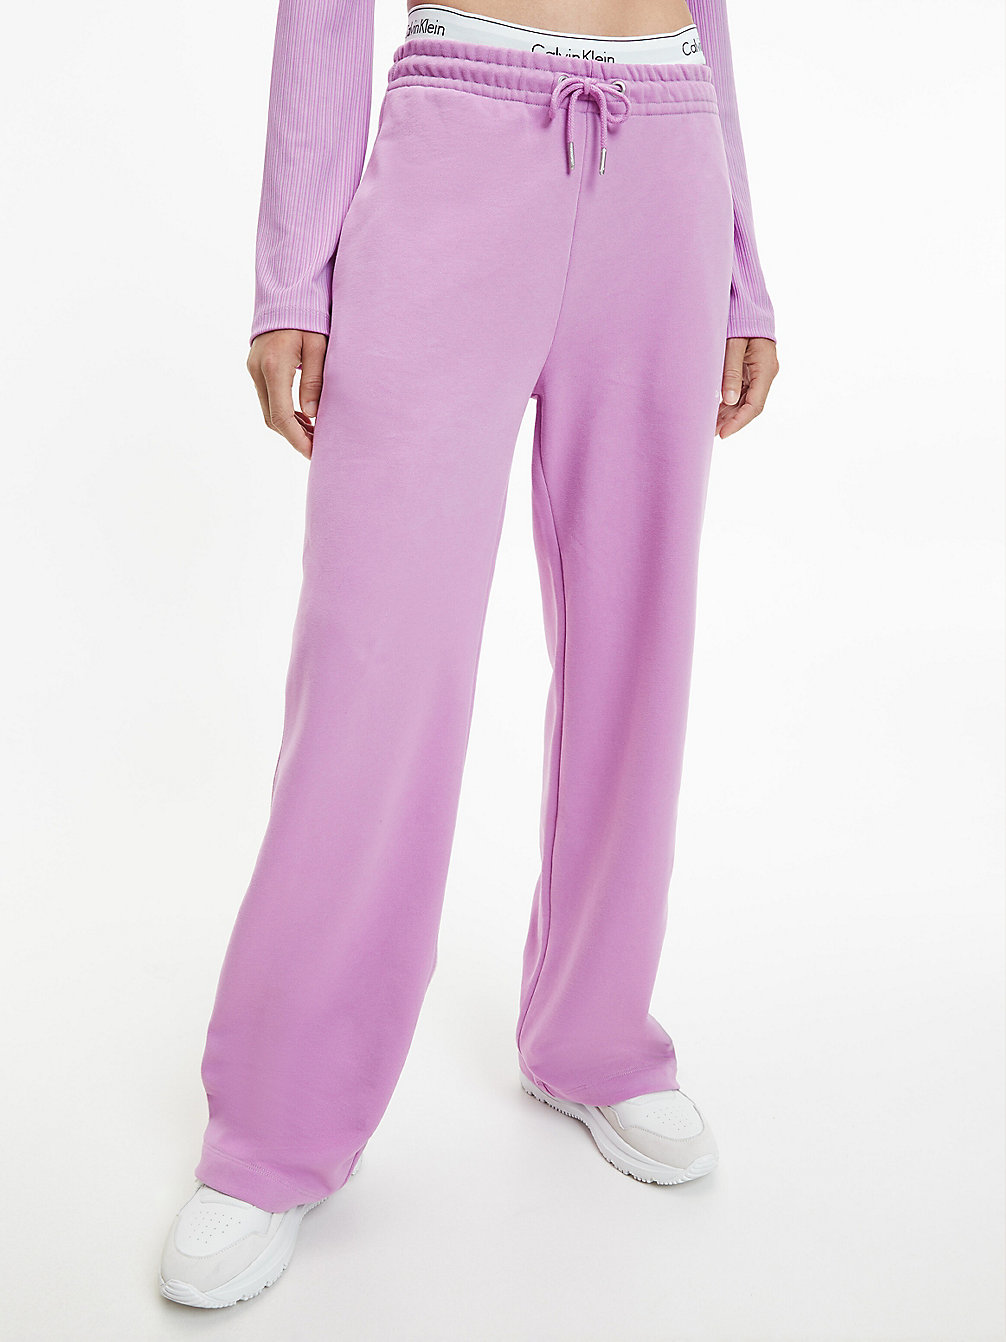 IRIS ORCHID Relaxed Straight Joggers undefined women Calvin Klein